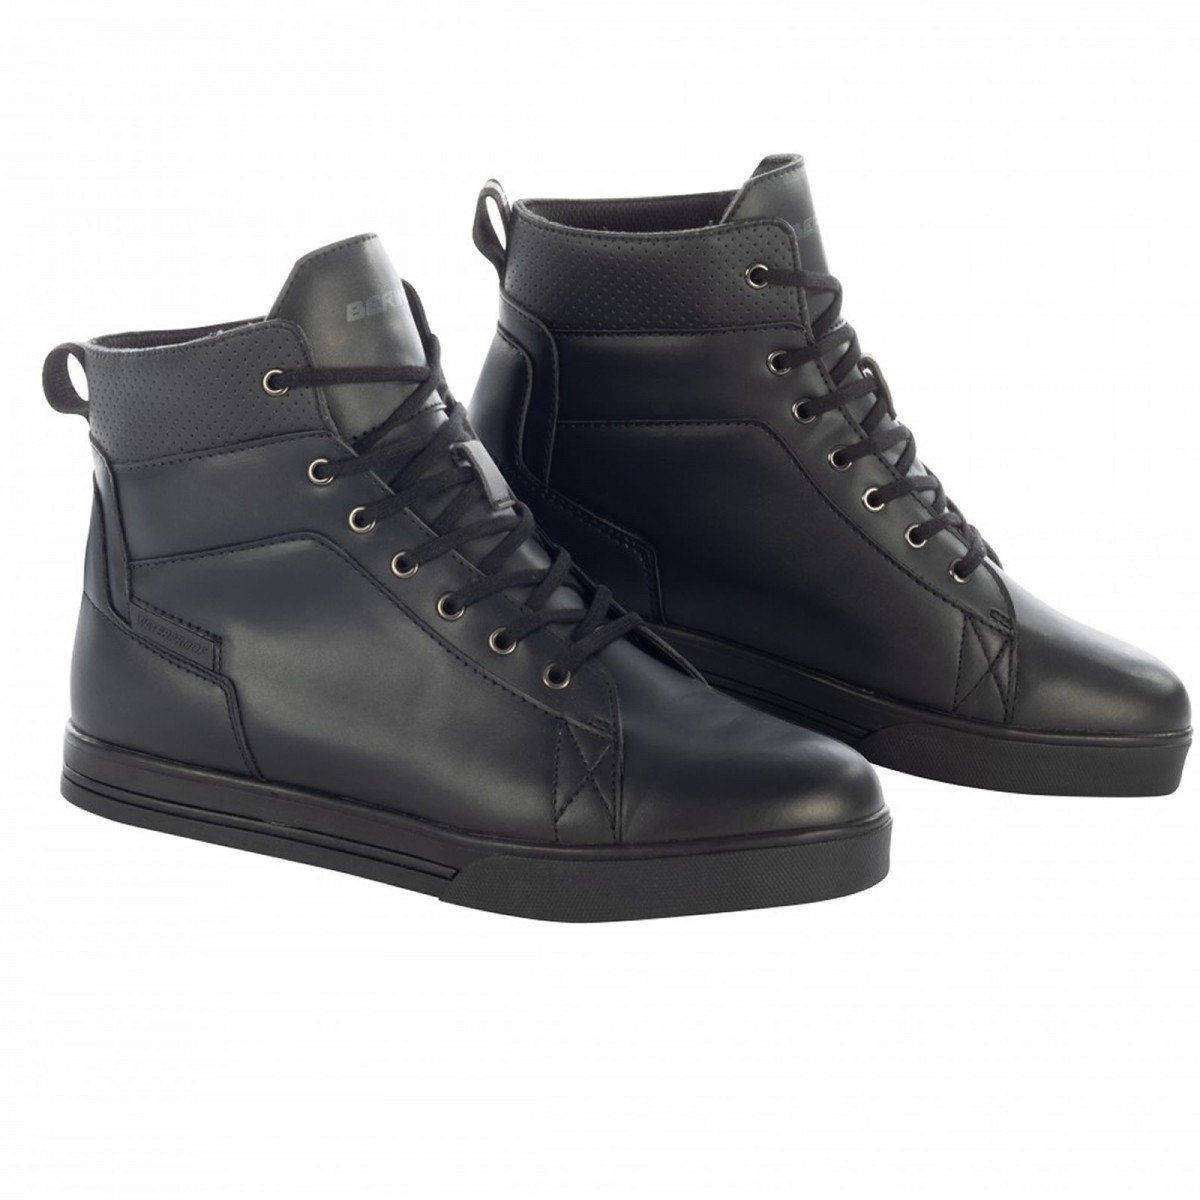 Image of EU Bering Indy Noir Chaussures Taille 41